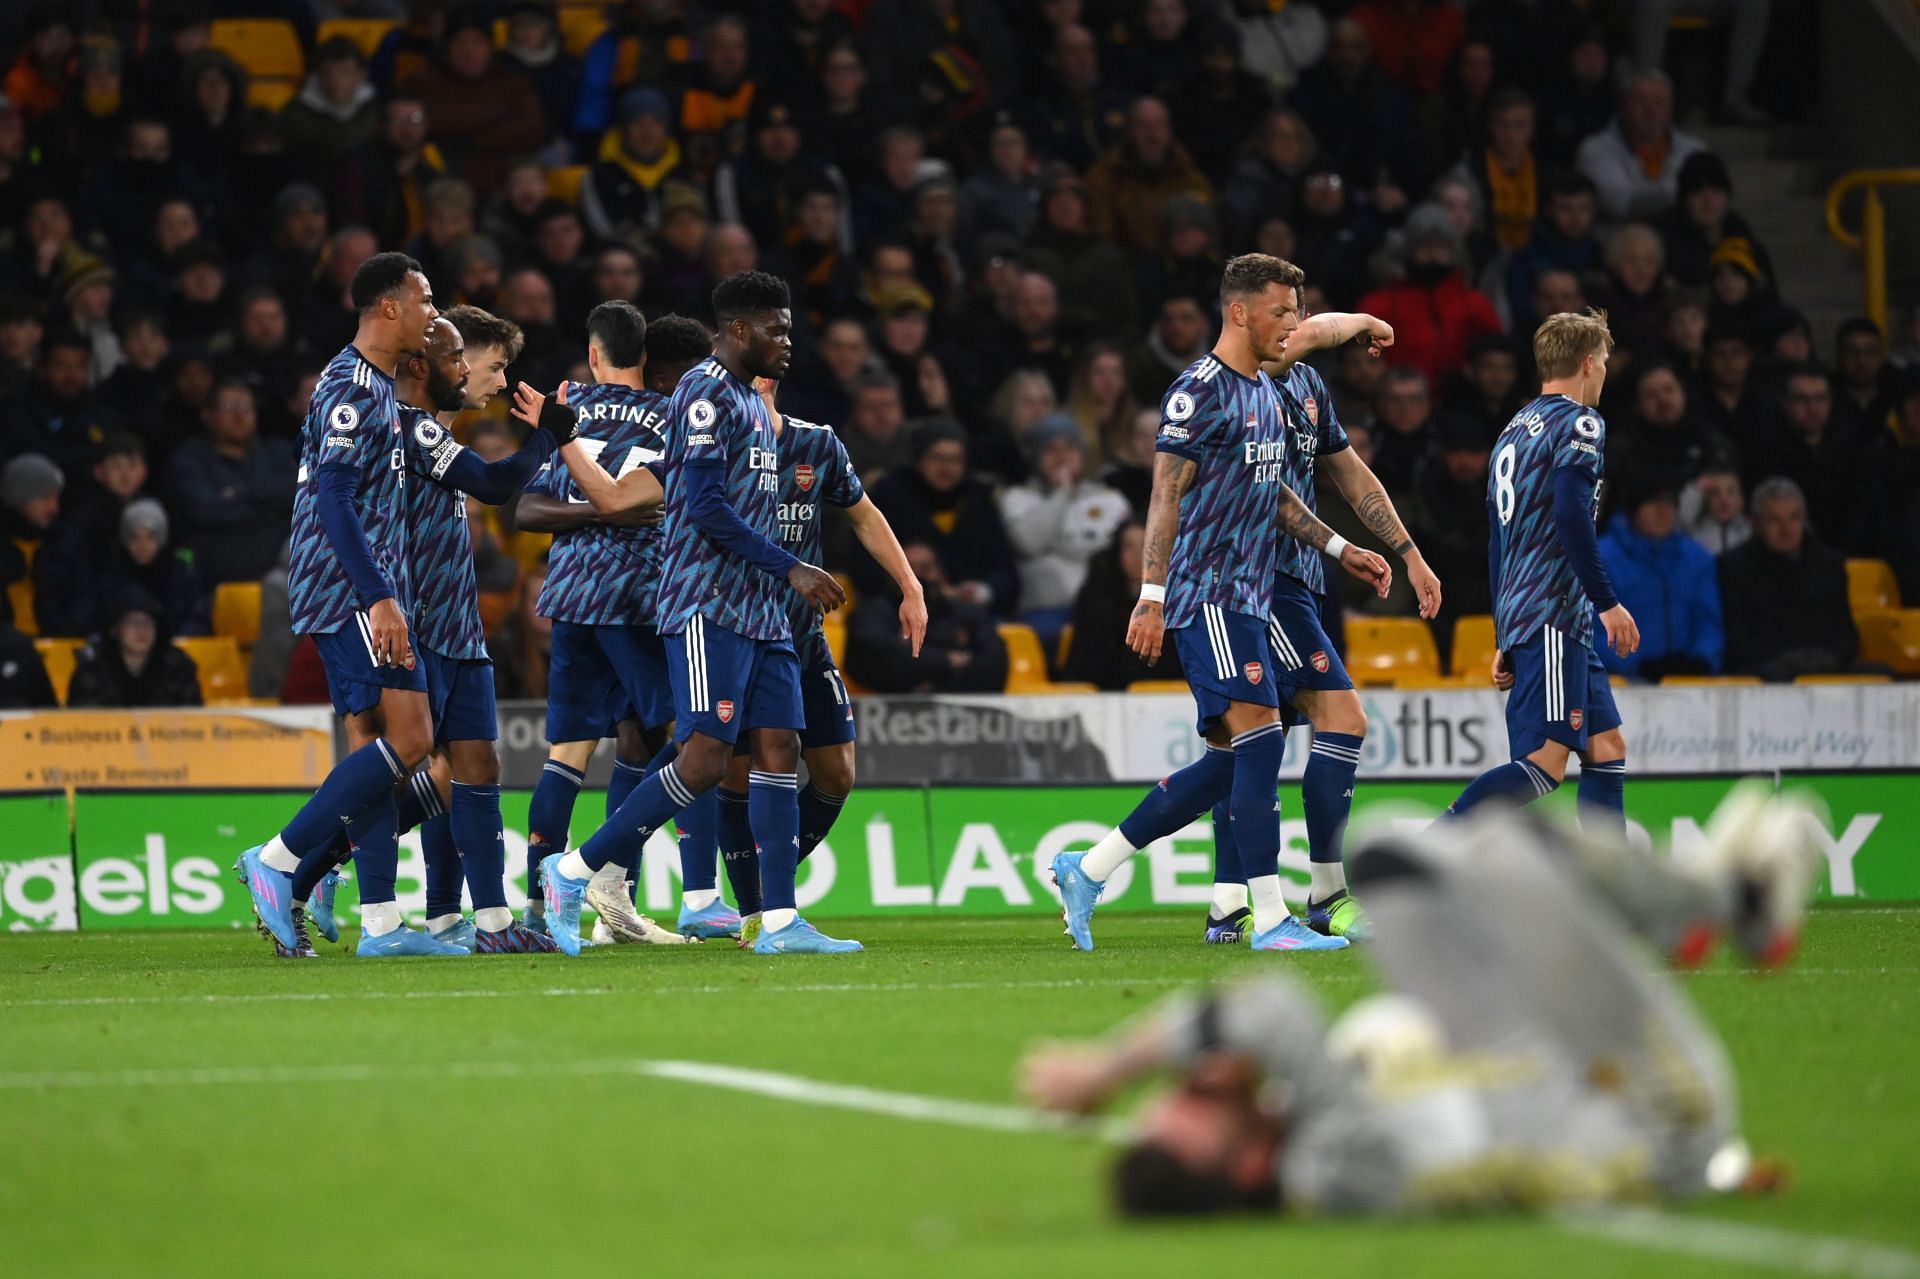 Arsenal eked out a vital victory against Wolves in their last game.